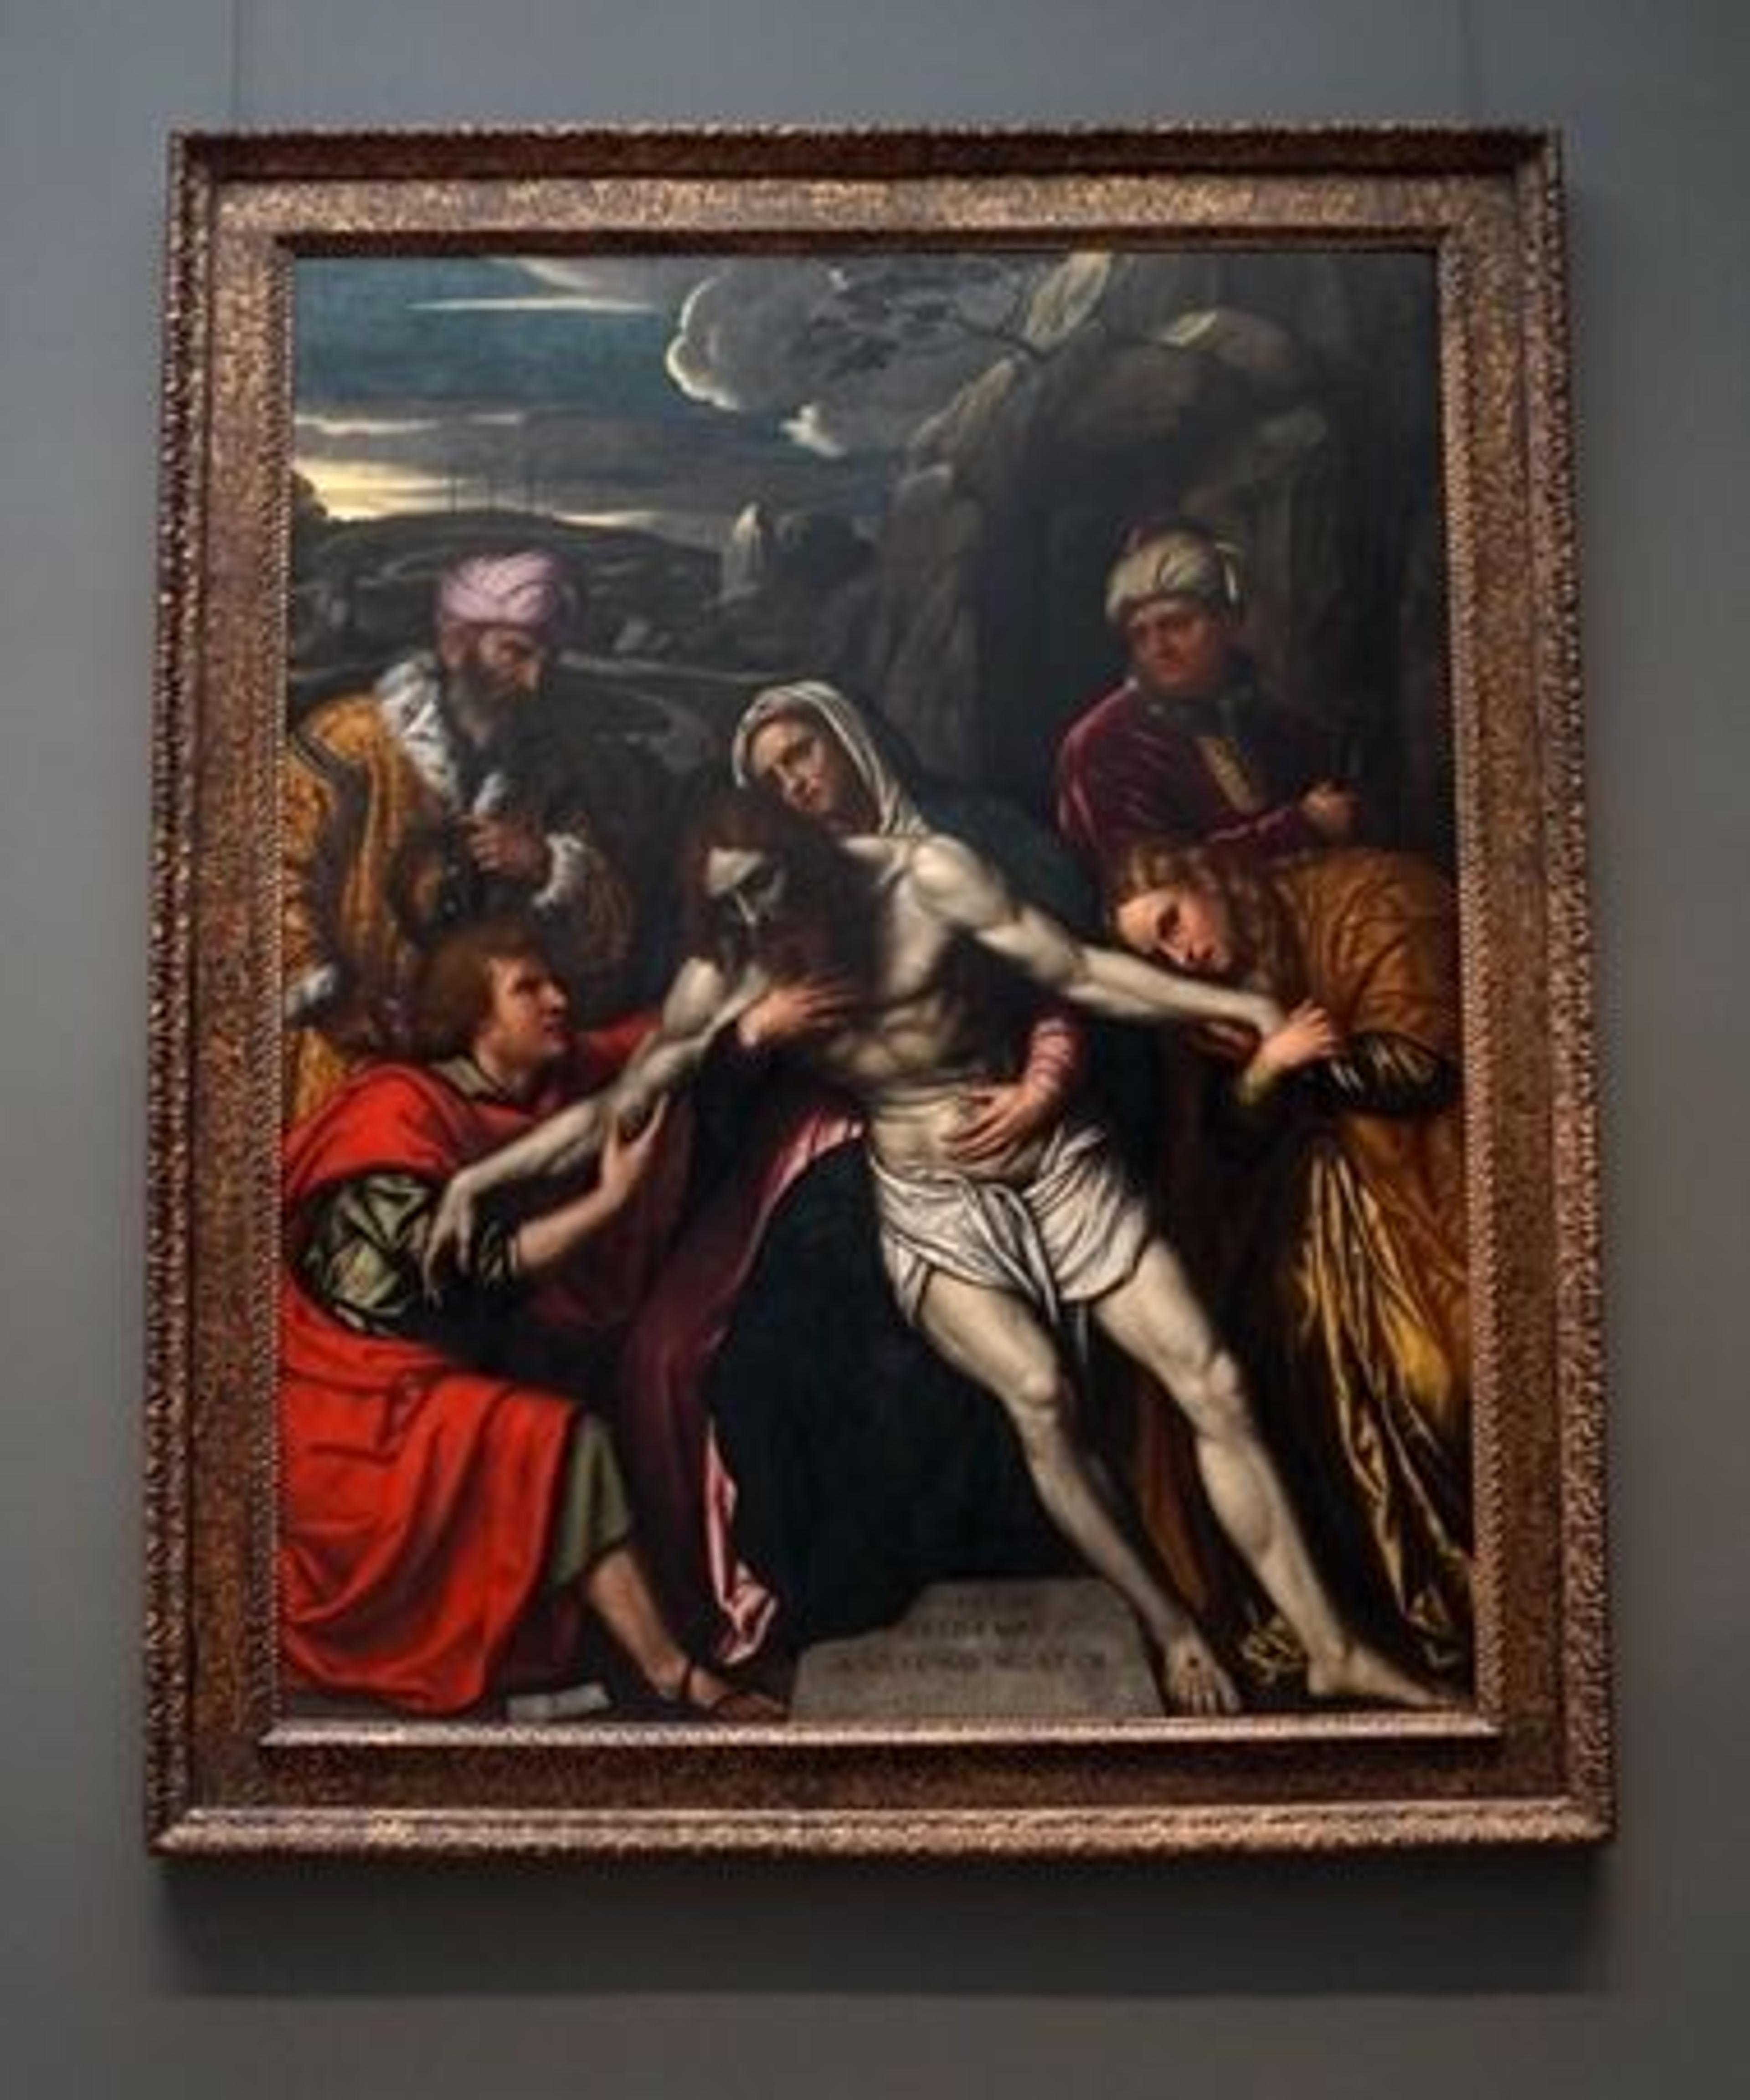 View of Moretto da Brescia's "The Entombment" on view in The Met's European paintings galleries